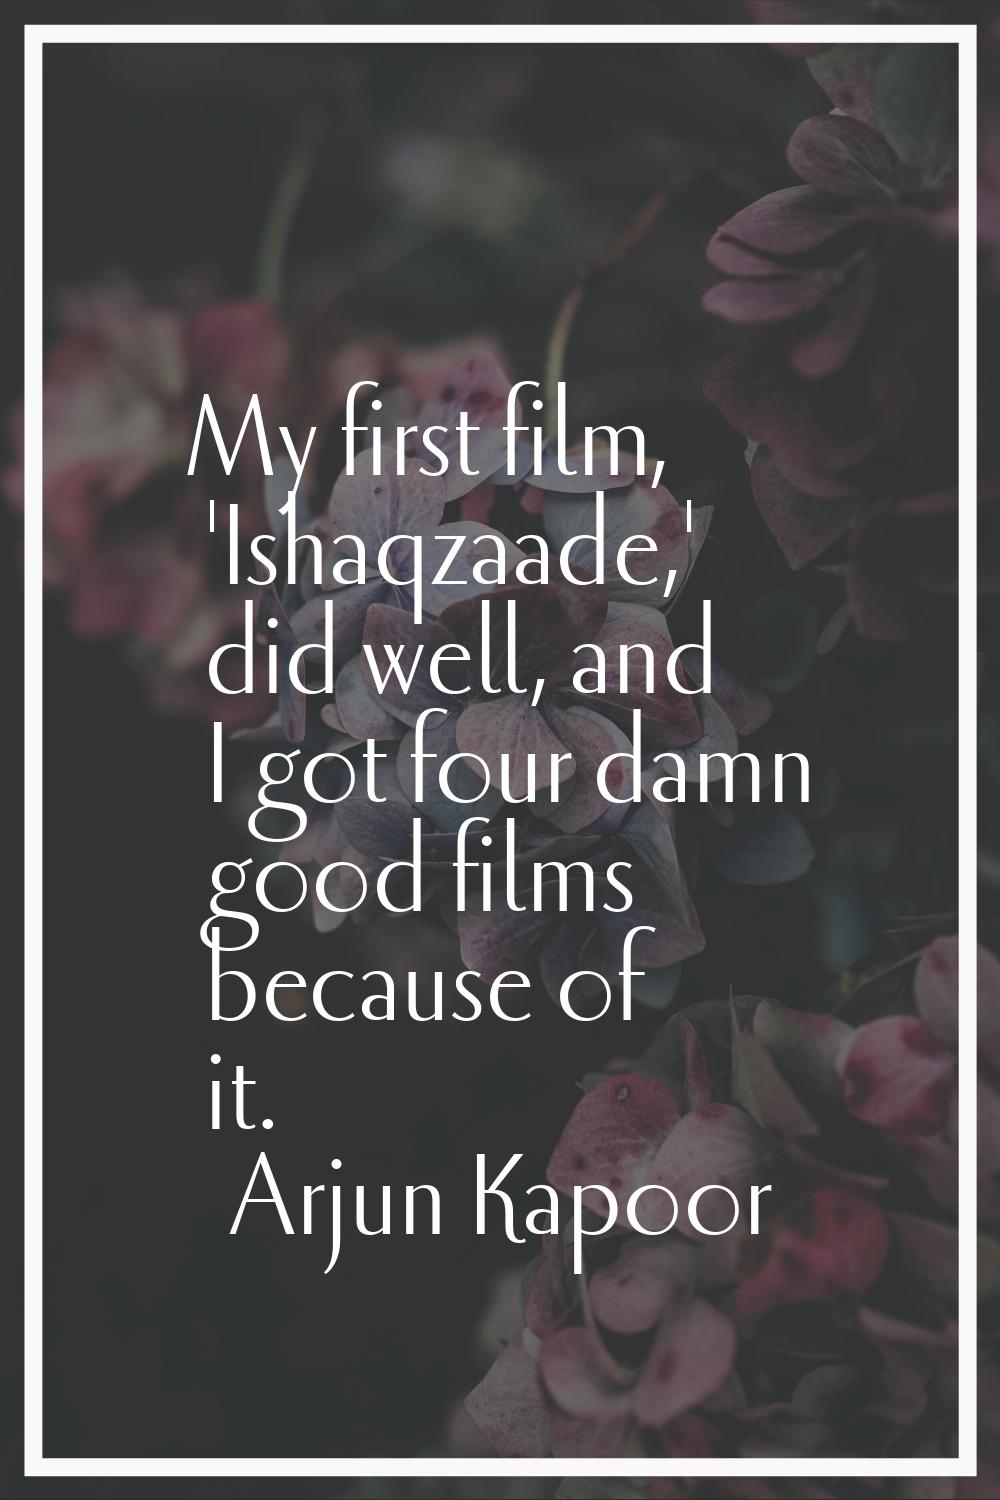 My first film, 'Ishaqzaade,' did well, and I got four damn good films because of it.